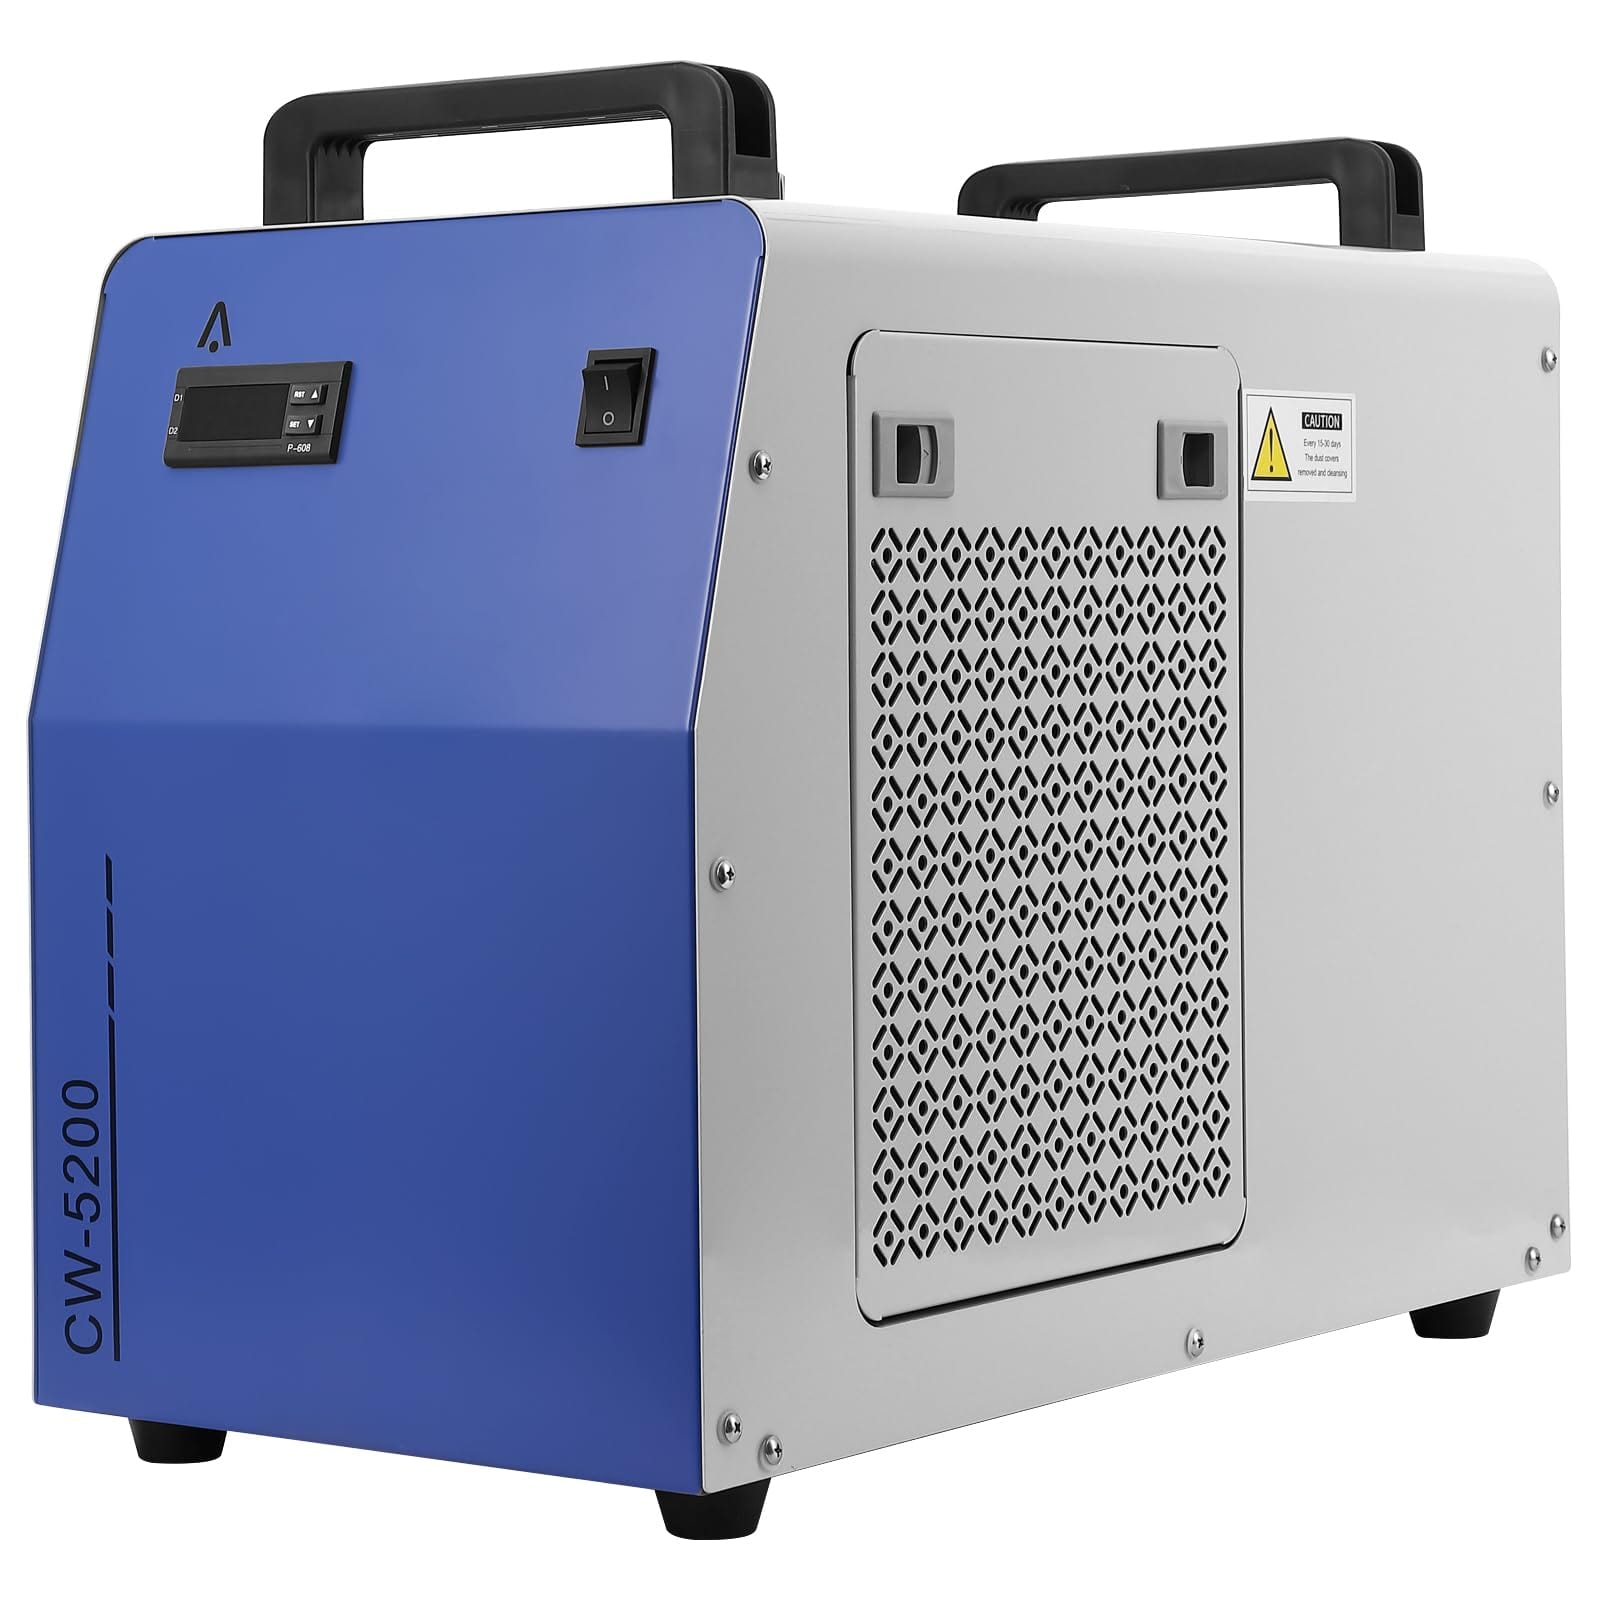 GARVEE 6L Industrial Water Chiller 0.9hp 2.6gpm CW-5200 Water Cooling System Water Cooler